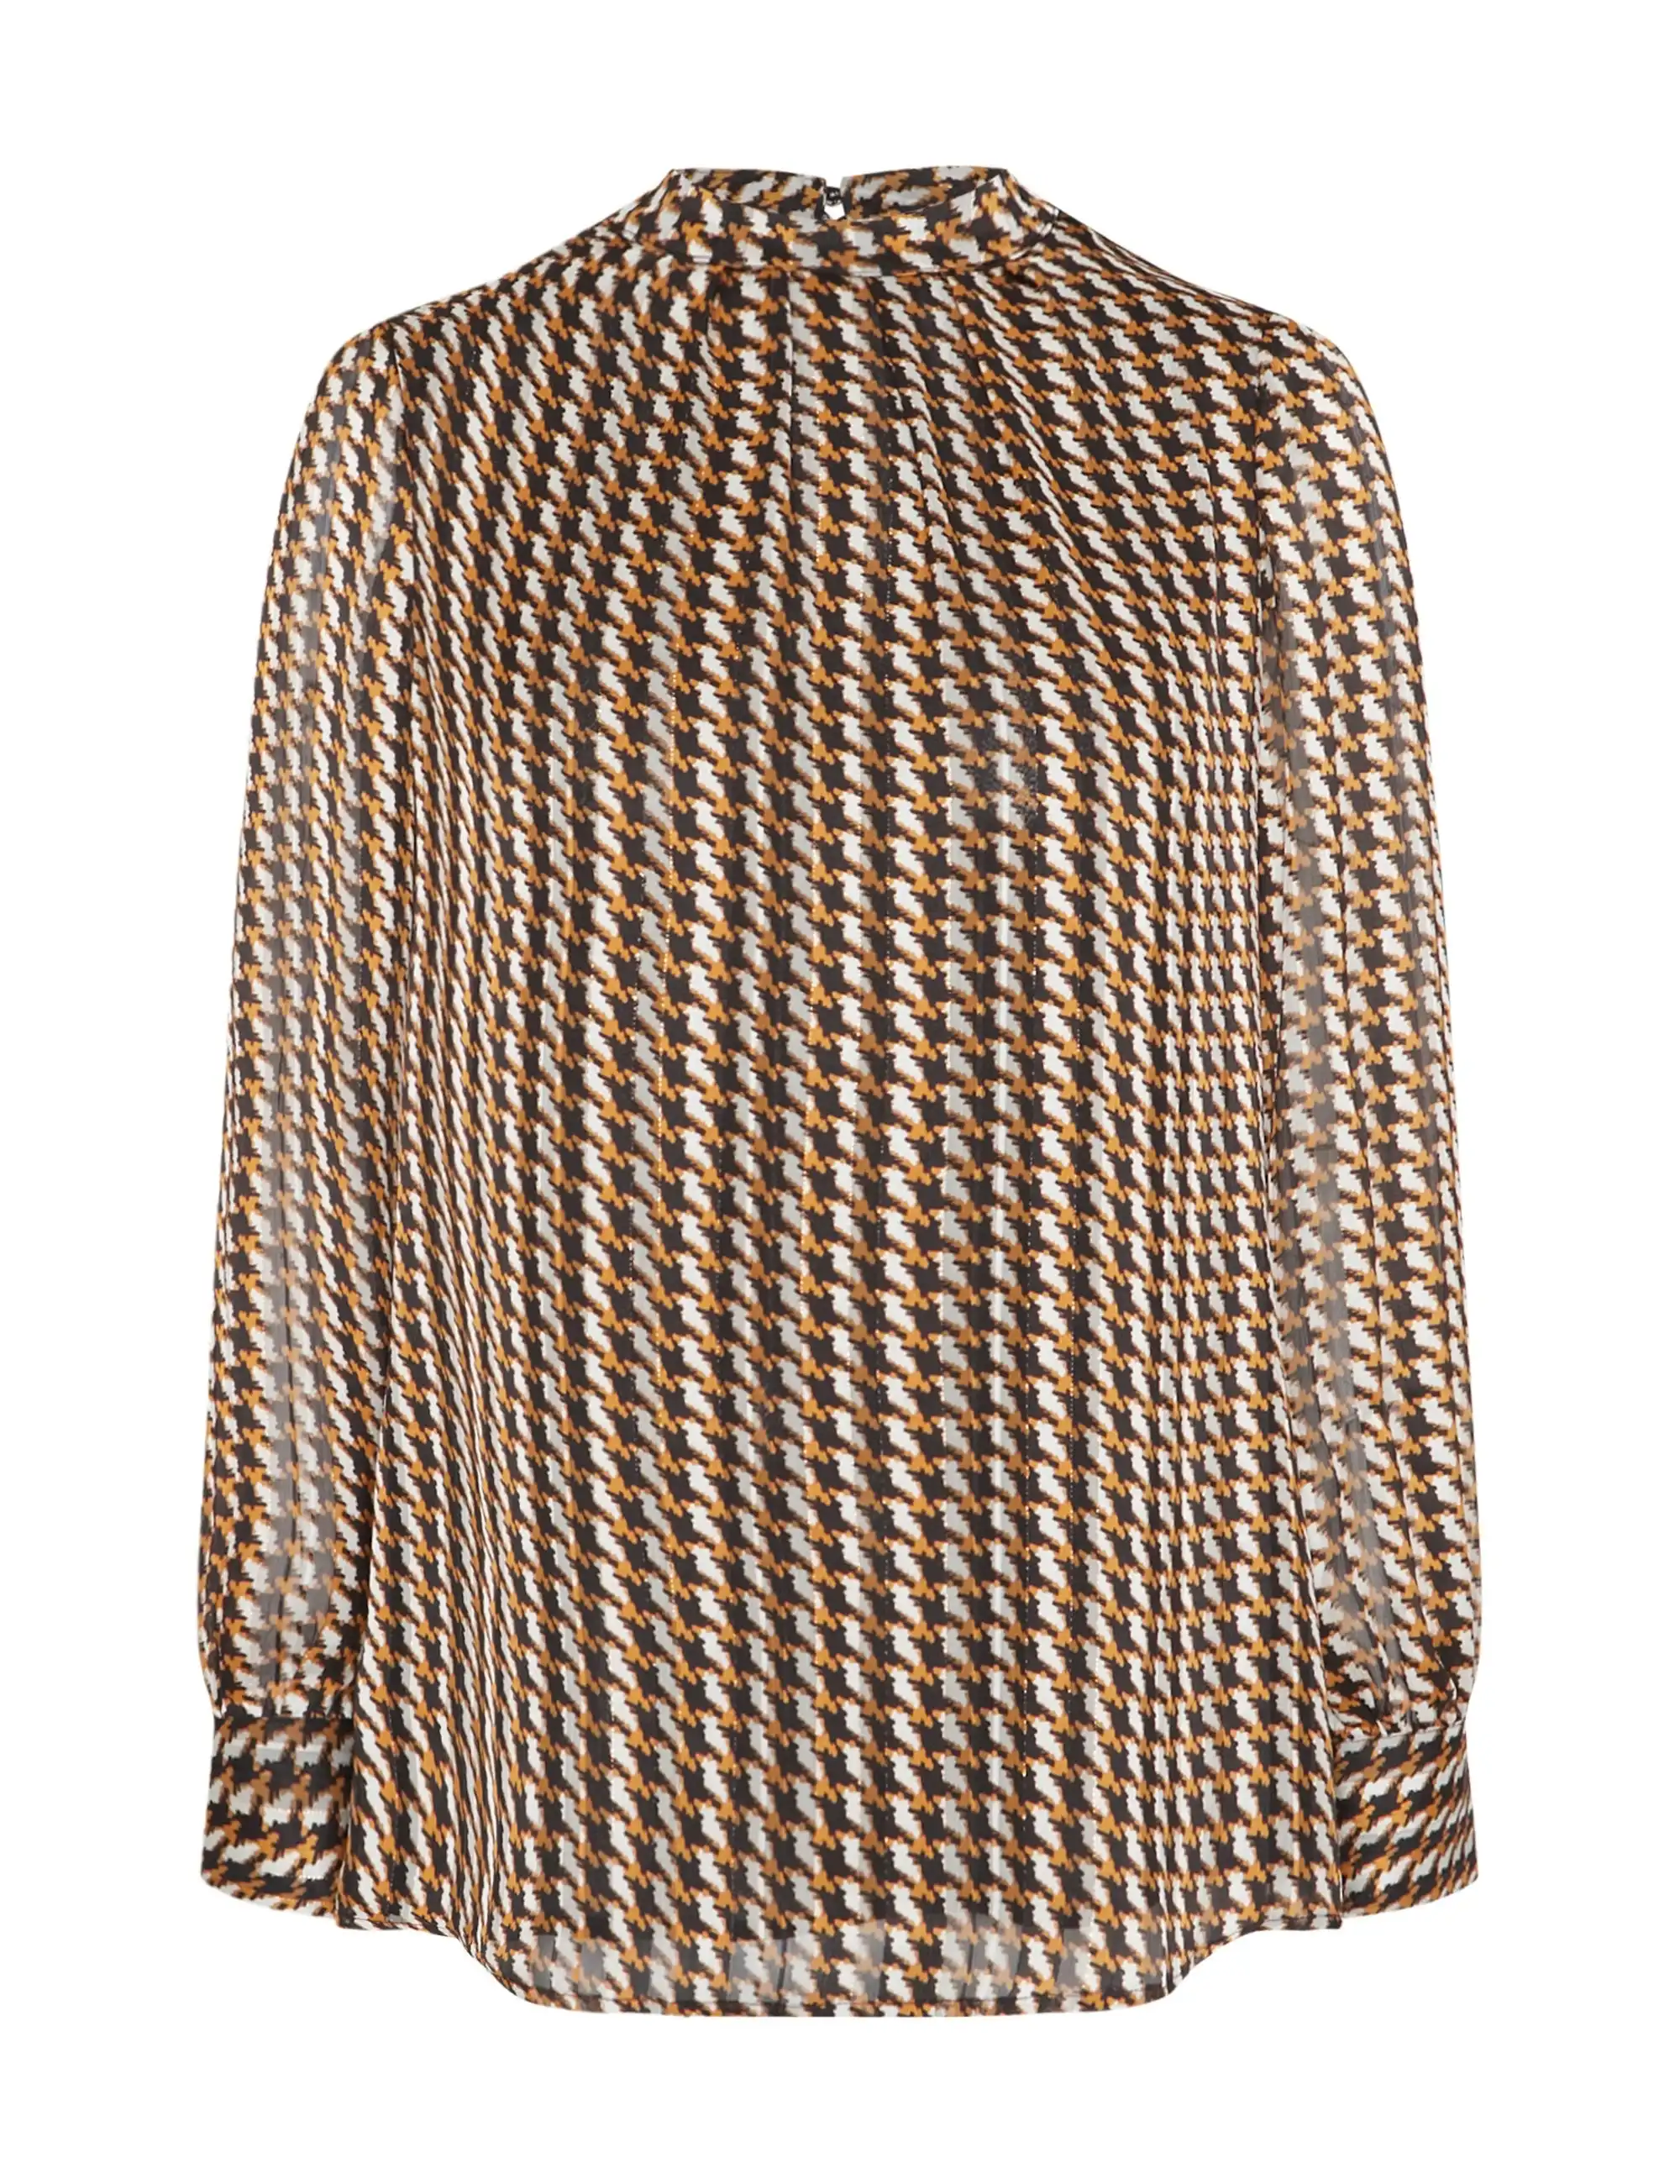 Noni B High Neck Houndstooth Blouse